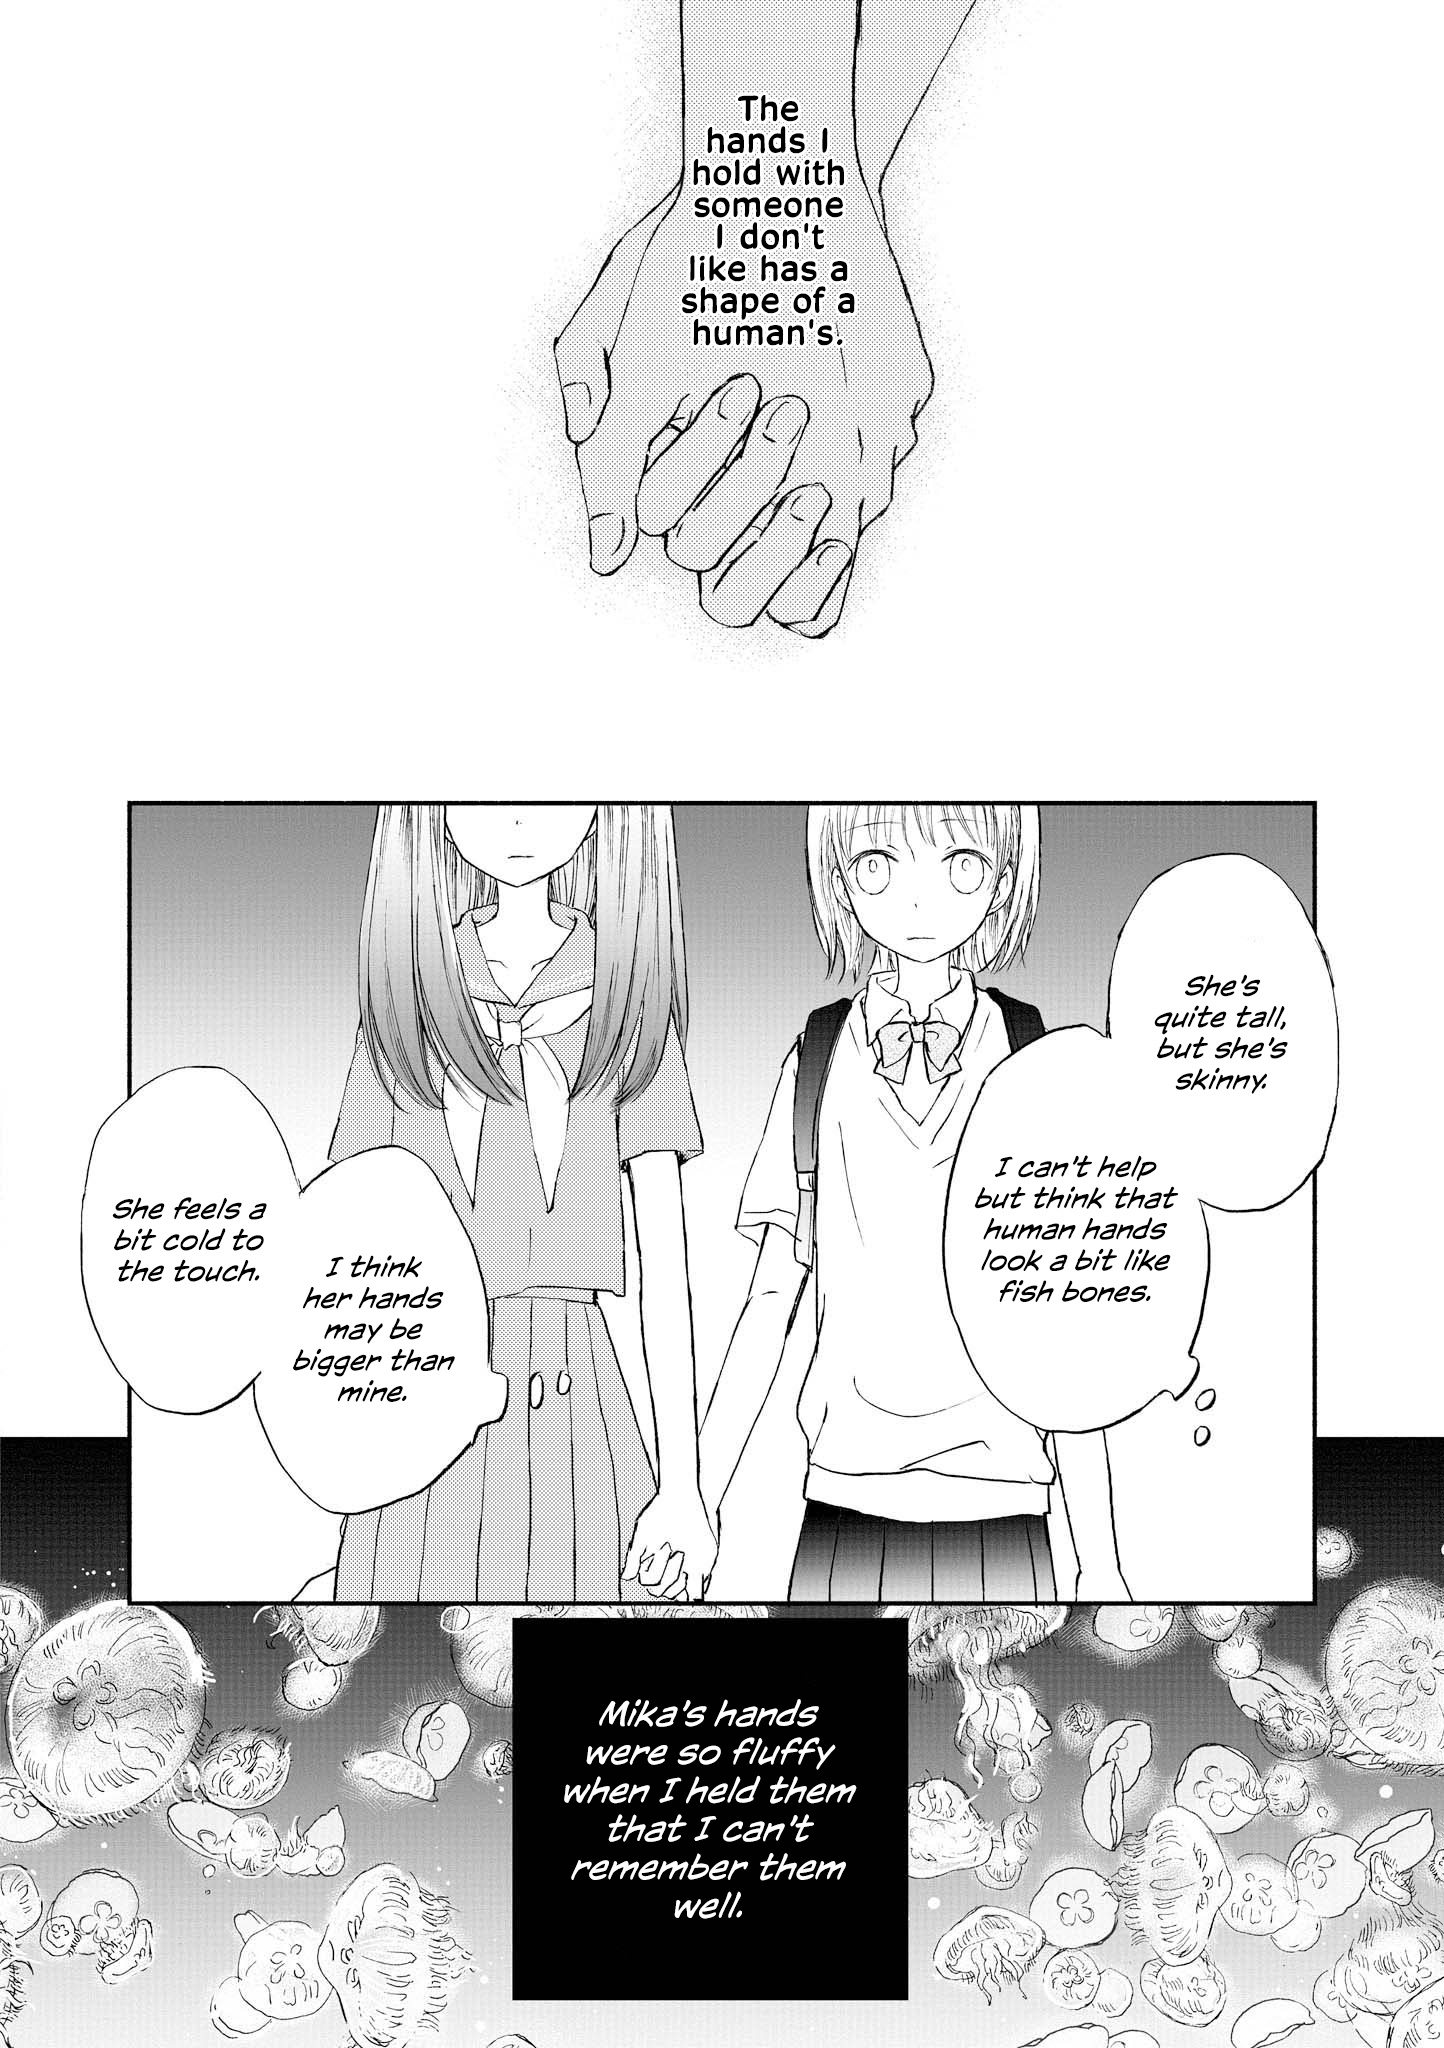 Love And Hate And Love (Unrequited Love Yuri Anthology) Chapter 5: Takahashi Mako - The Hands I Hold With Someone I Don't Like Has A Shape Of A Human's - Picture 2